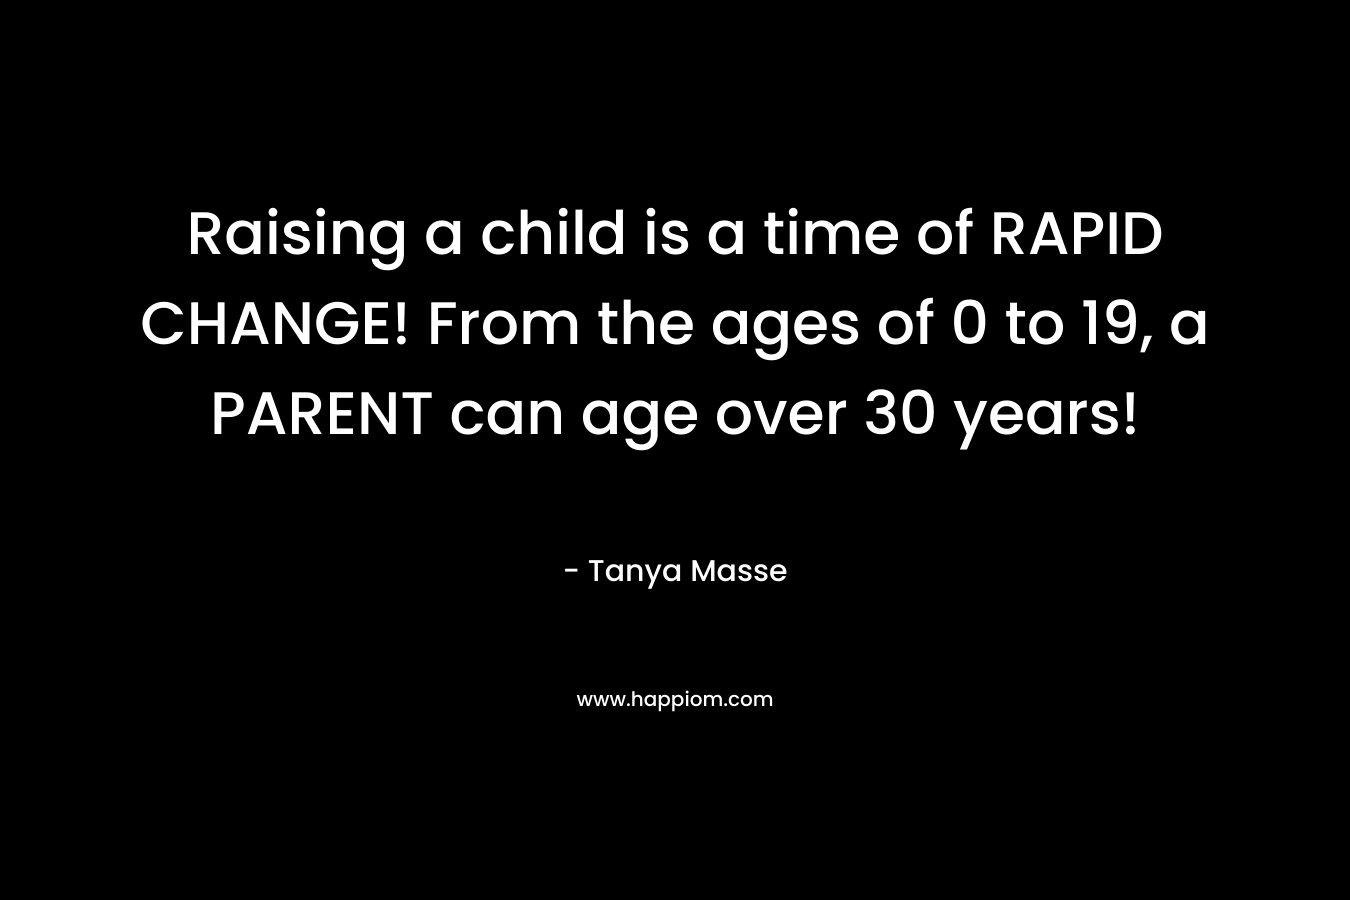 Raising a child is a time of RAPID CHANGE! From the ages of 0 to 19, a PARENT can age over 30 years!